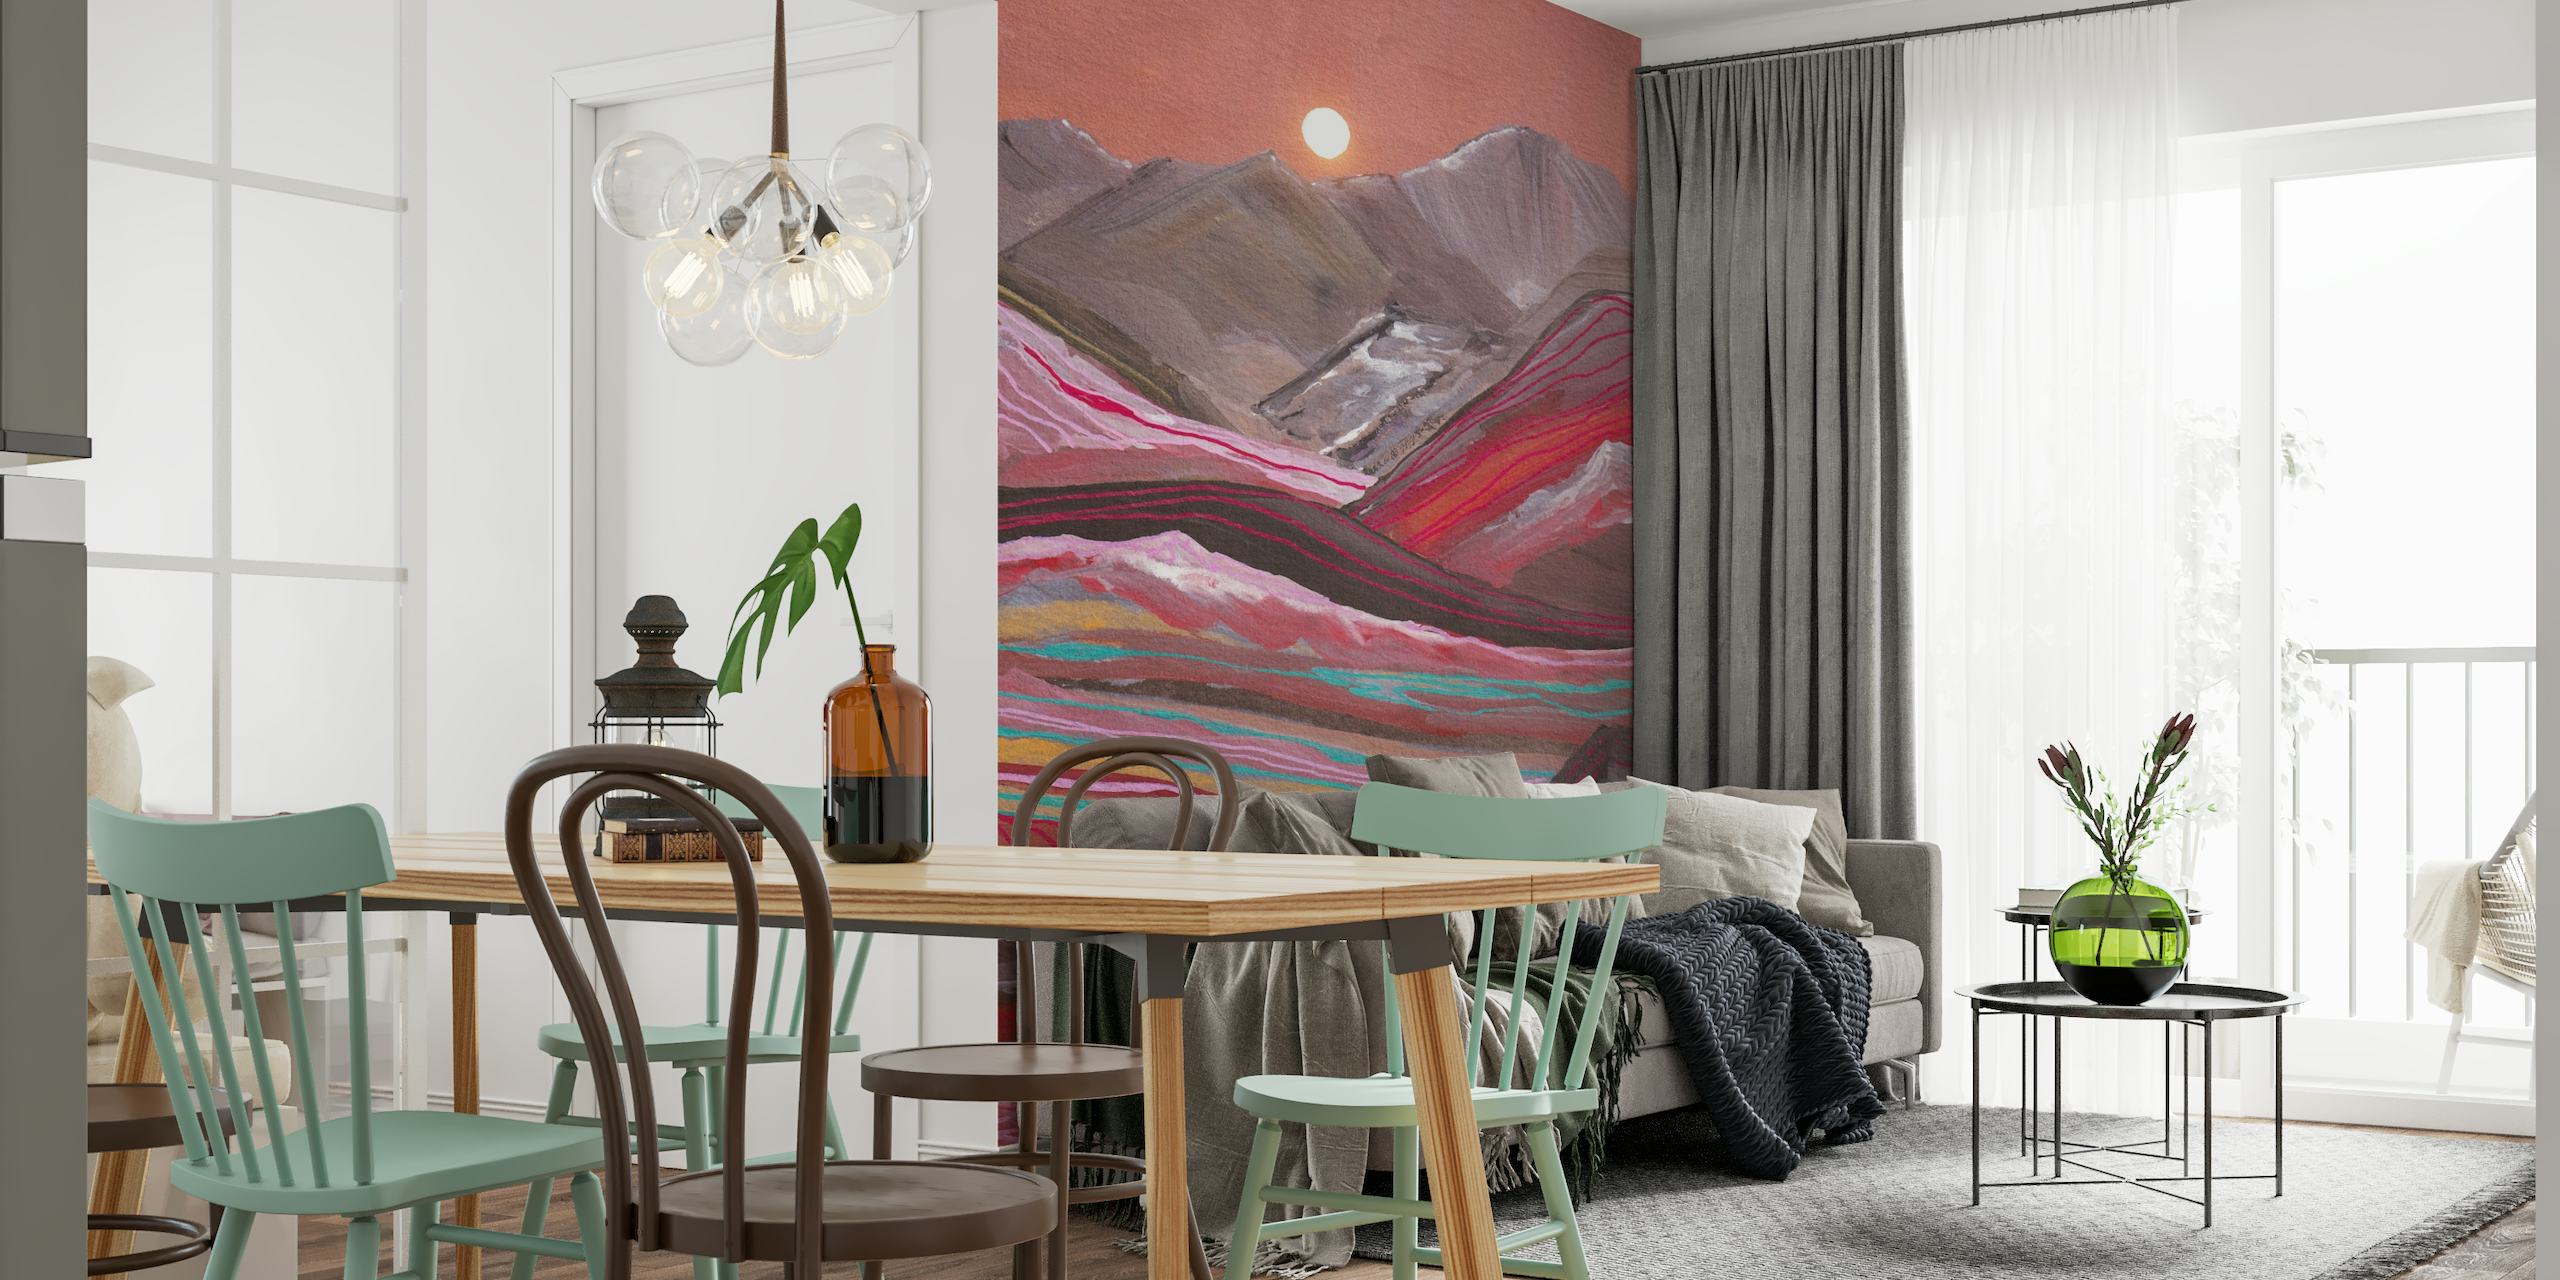 Artistic wall mural of colorful rainbow-striped mountains under a full moon